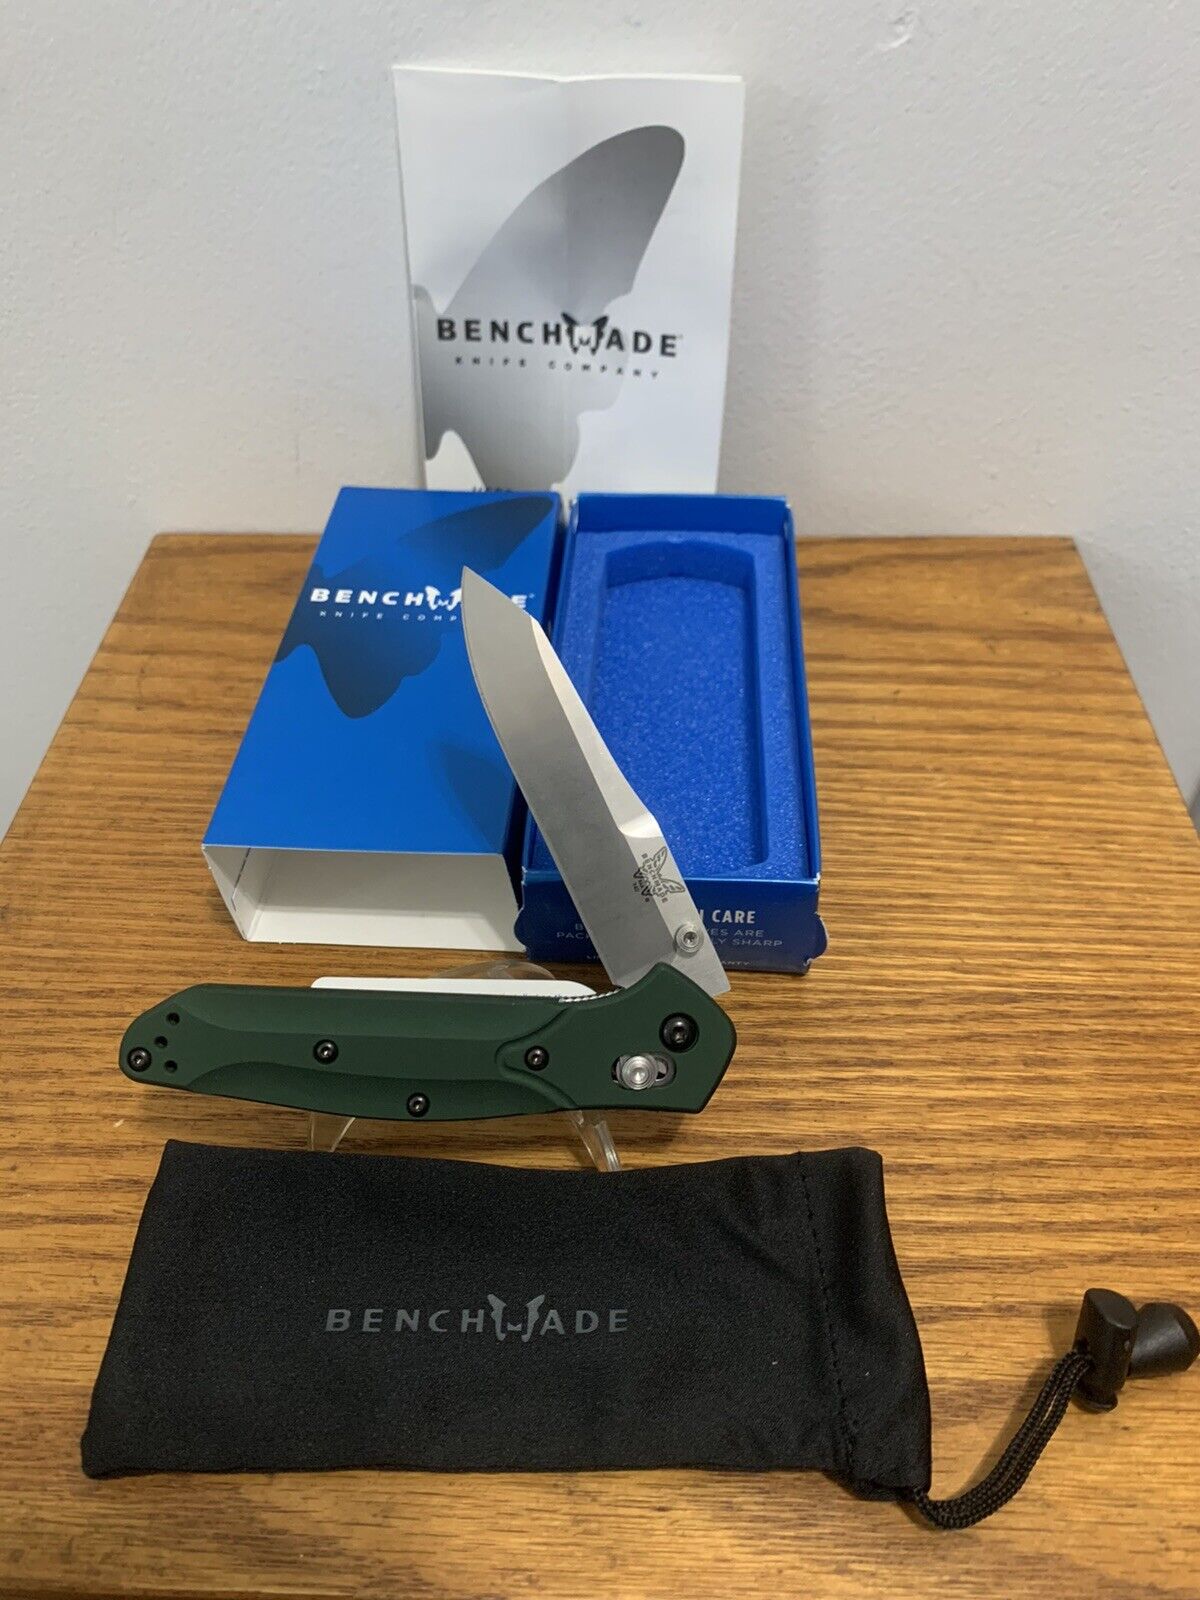 Benchmade 940 Osborne Axis New in Box Aluminum Handle Never Used Or Carried